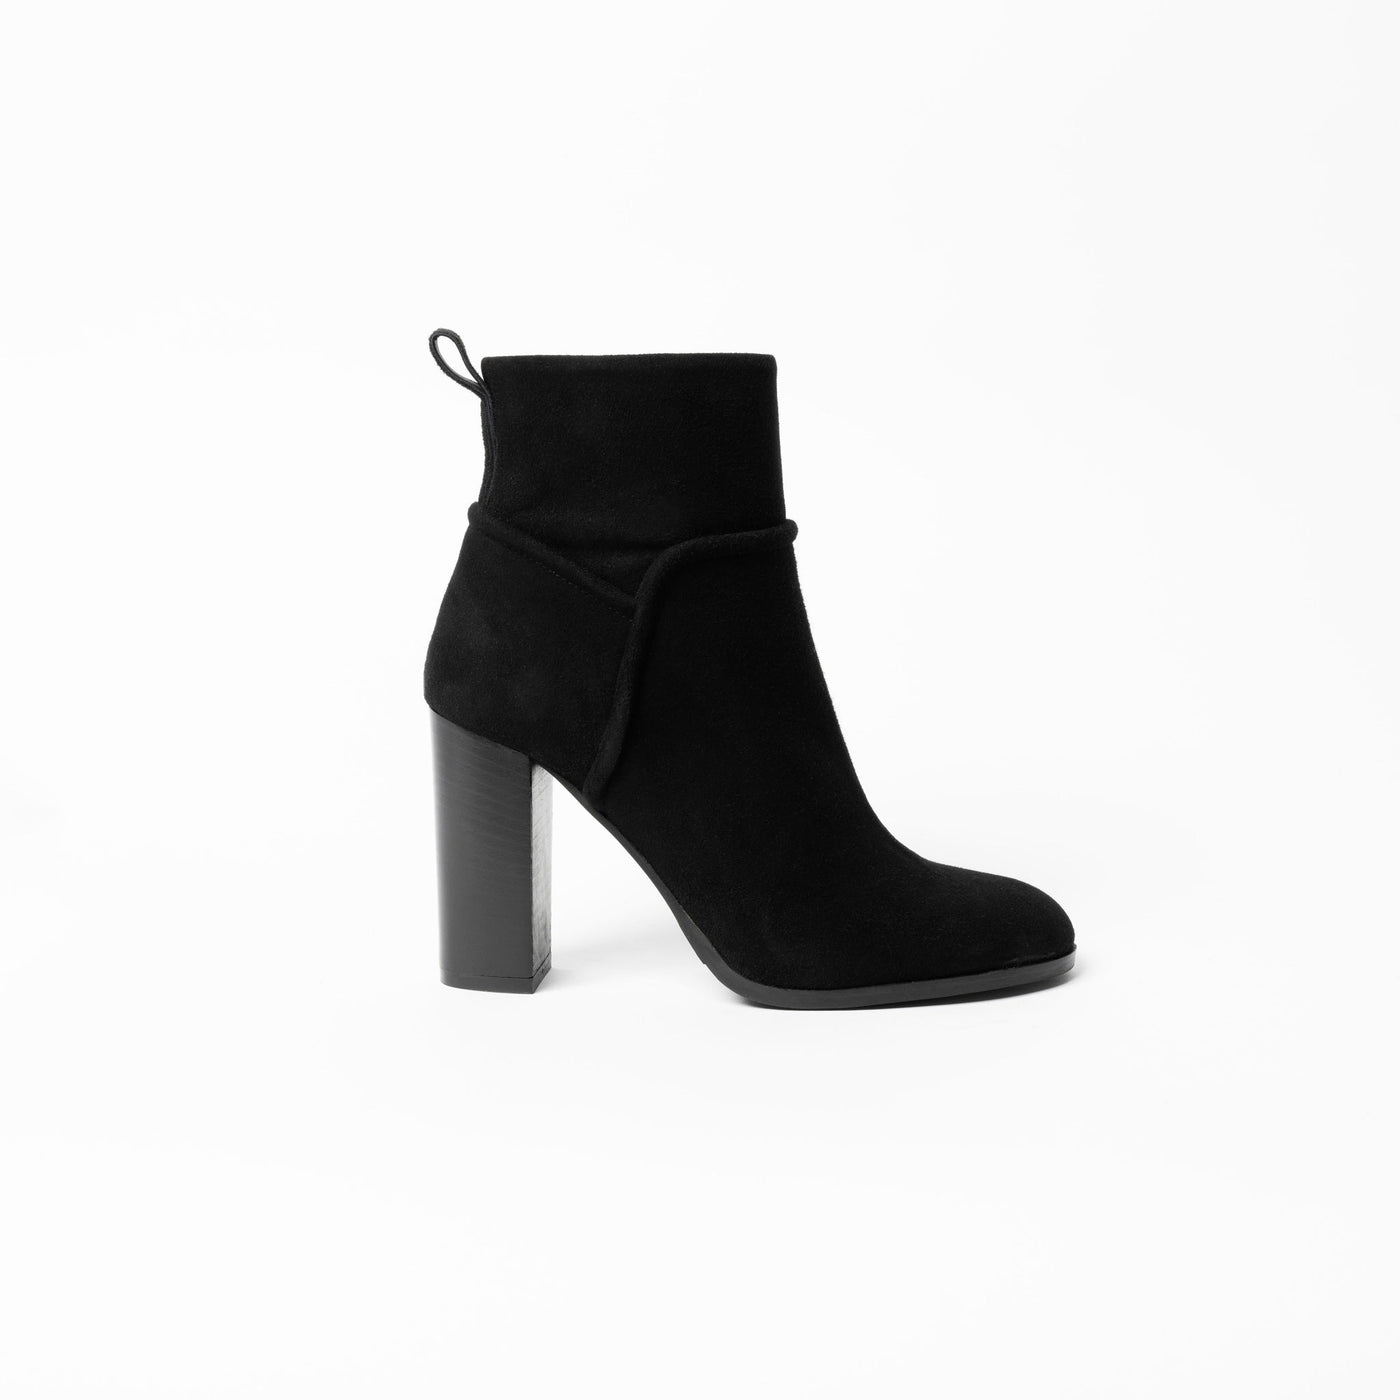  Black suede leather ankle boots with block heels. 